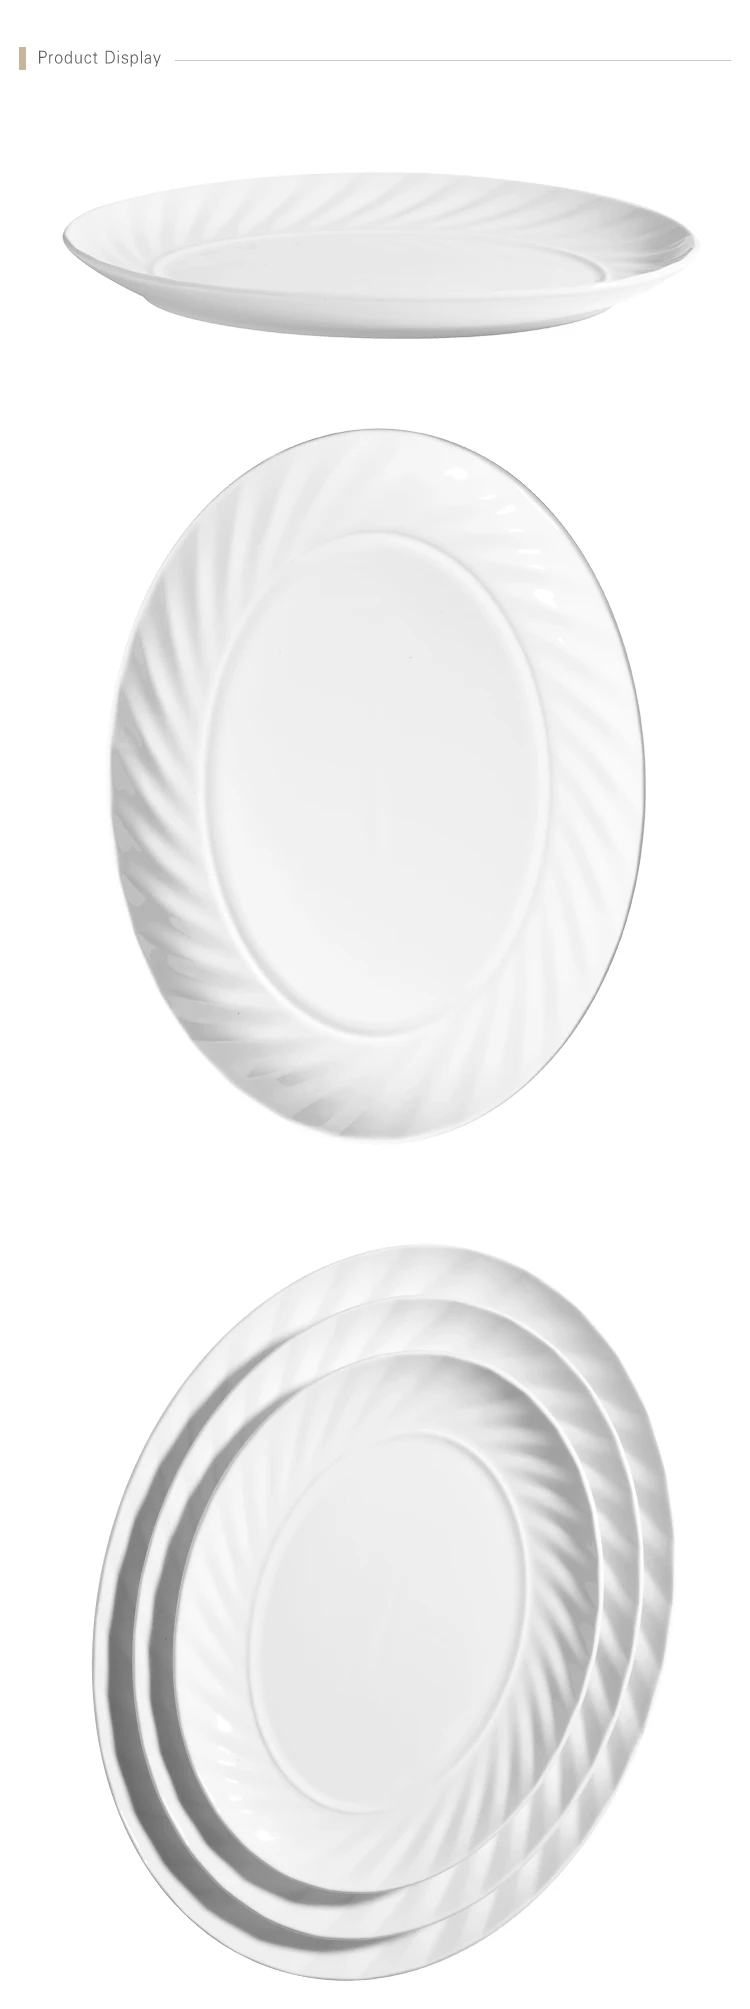 Chaozhou Factory Scratch Proof  White Ceramic Catering Restaurant Oval Dish, Platters Oval, Hotel Vajilla Con Ovalos